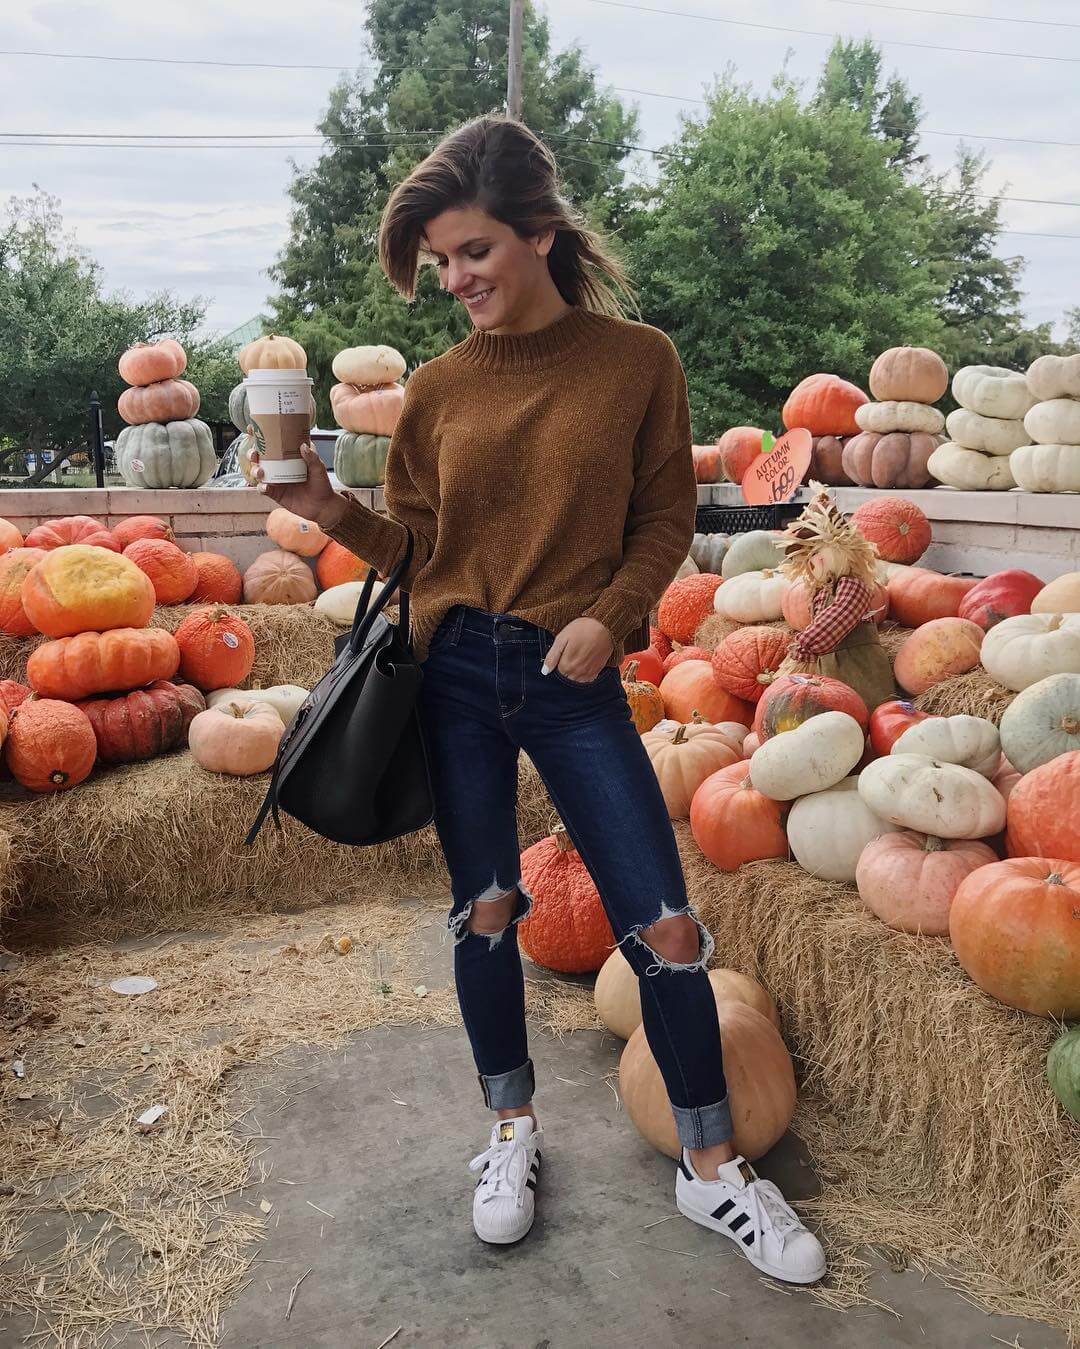 brighton keller dallas fashion blogger wearing fall outfit with adidas superstar sneakers, high-waisted levi's jeans and gold sweater